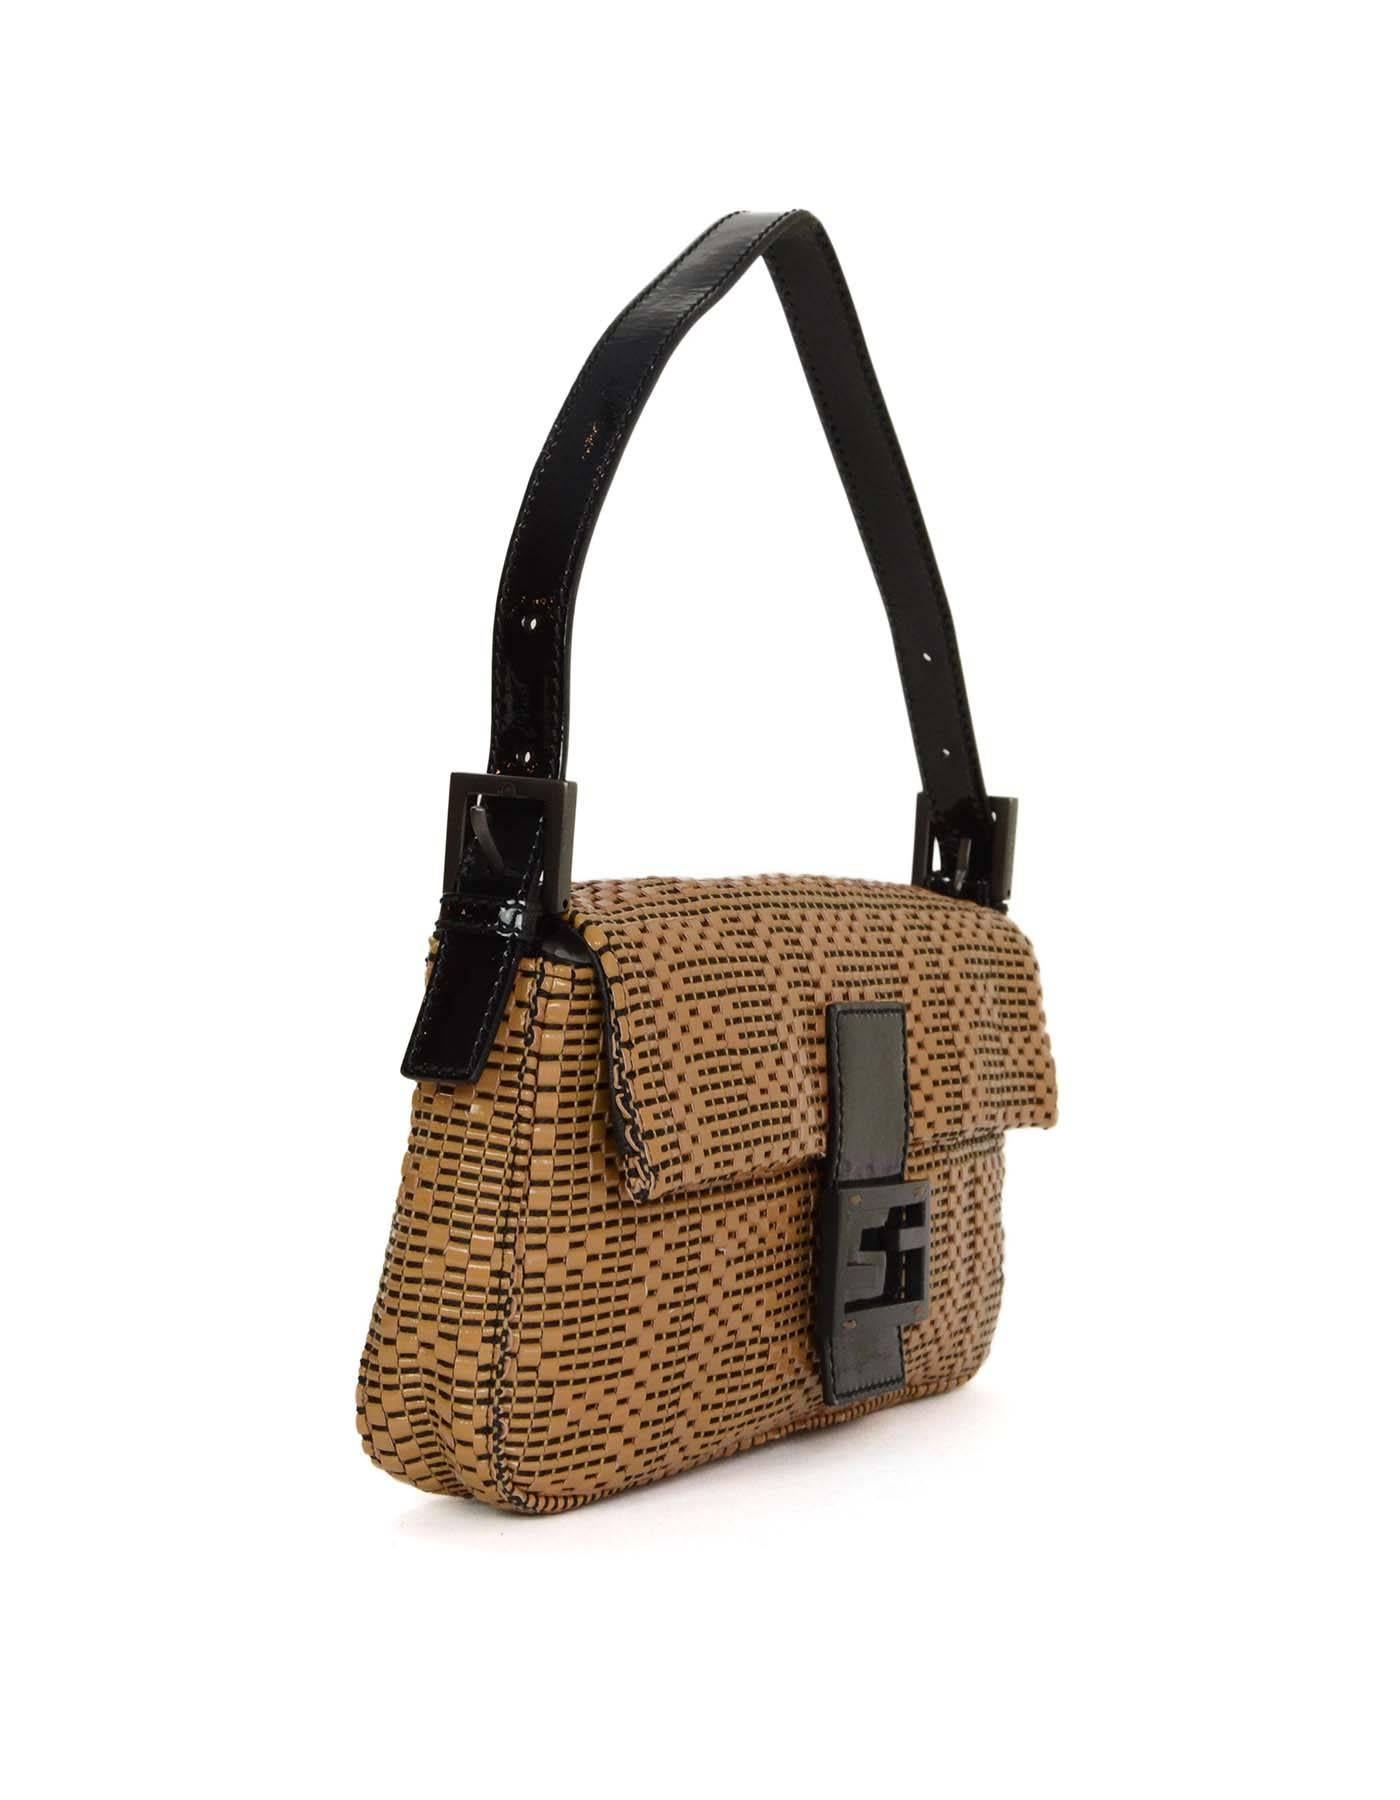 Fendi Woven Patent Beige Baguette Bag
Features woven leather that creates the Fendi logo and a Fendi forever clasp at the center. Removable shoulder strap for optional use as a clutch

Made in: Italy
Color: Beige and black
Hardware: